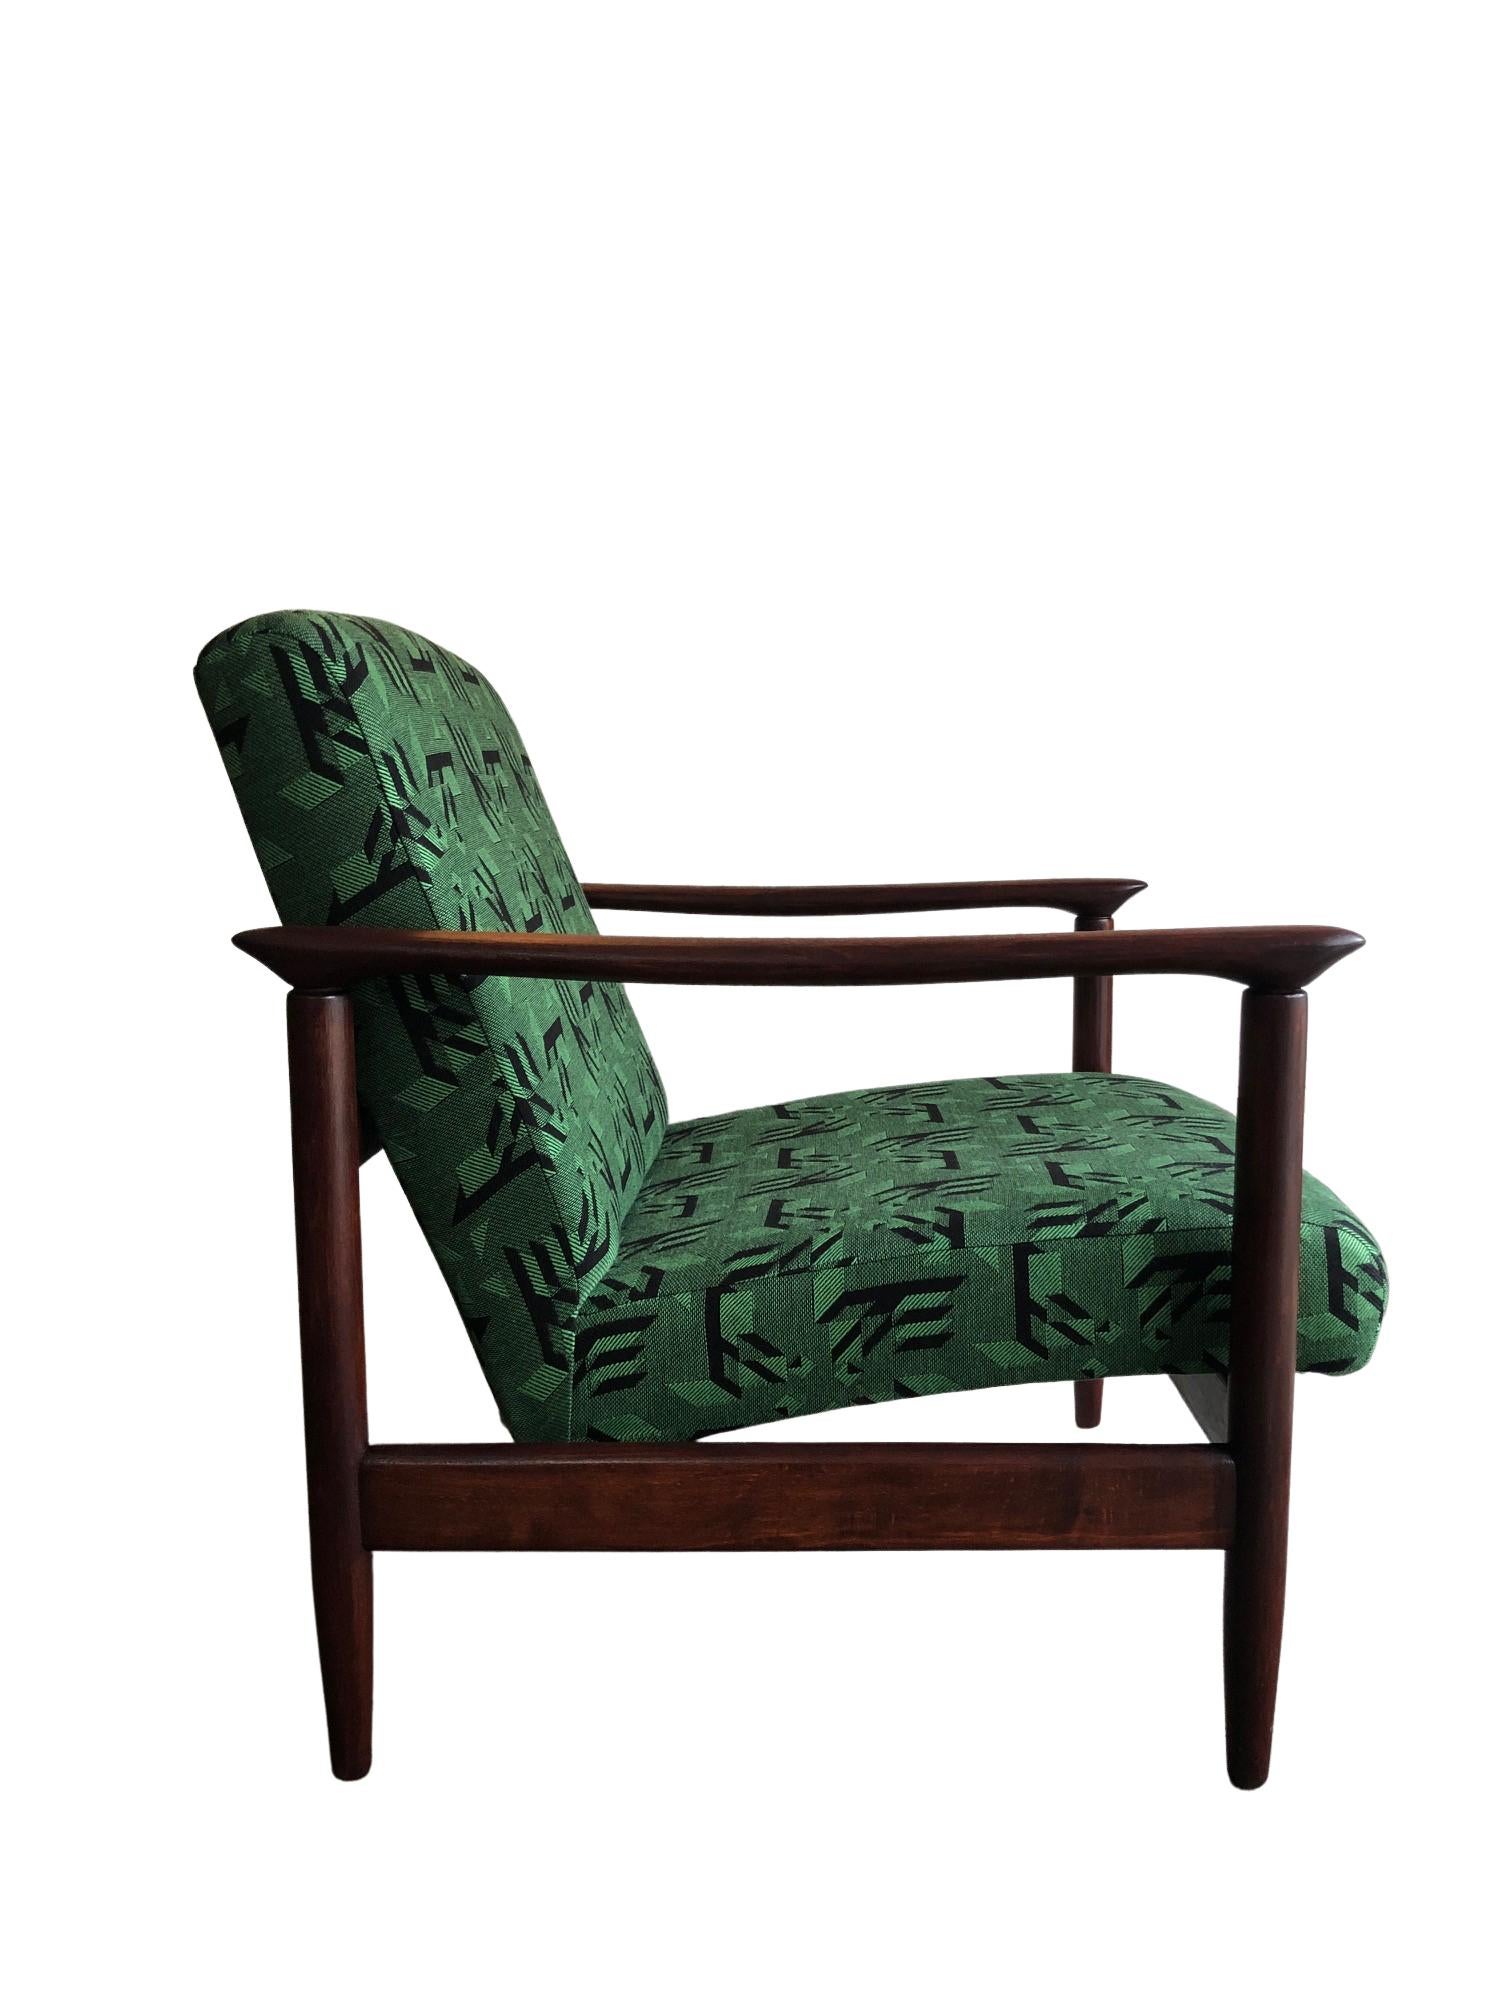 Polish Mid Century Armchair in Green Jacquard, by Edmund Homa, 1960s For Sale